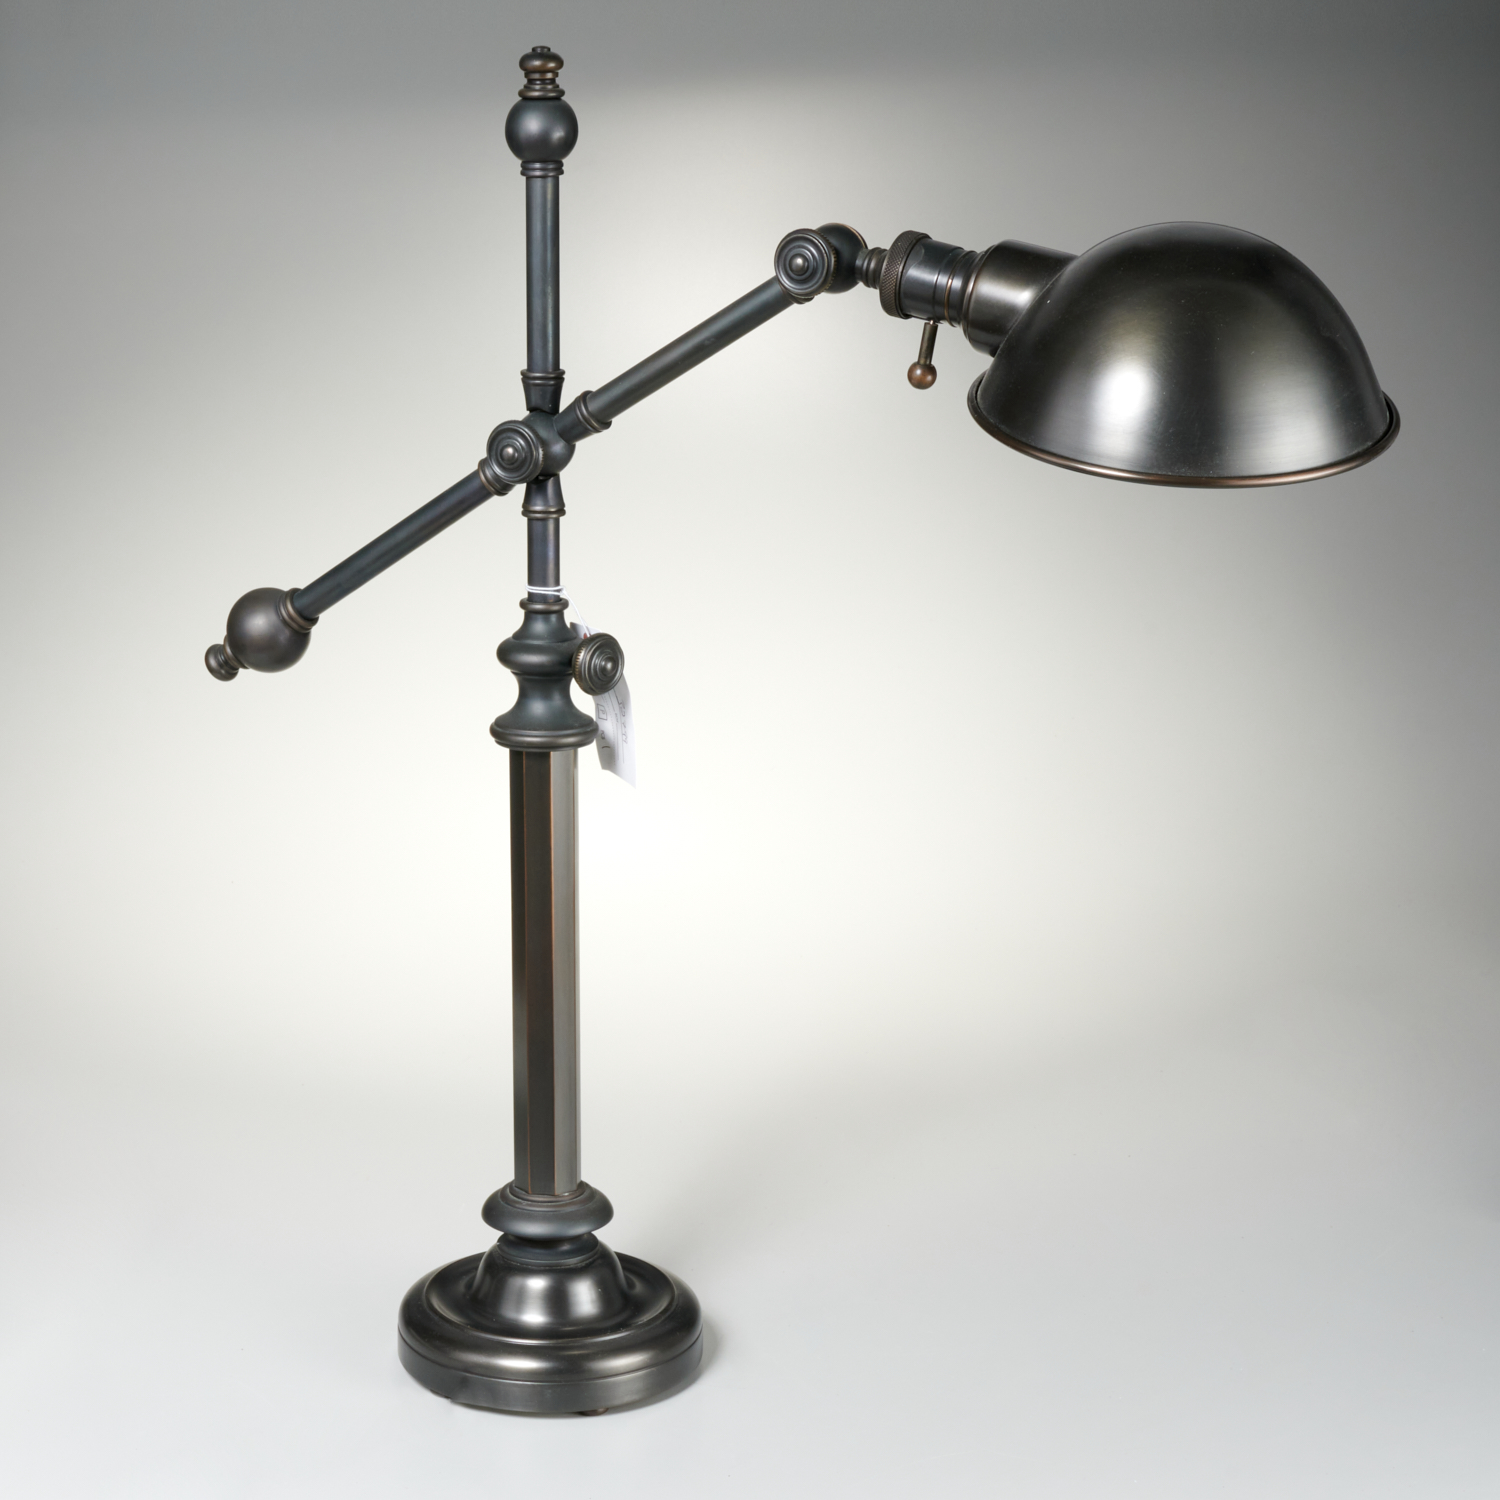 INDUSTRIAL STYLE DESK LAMP 21st 2ce2f3